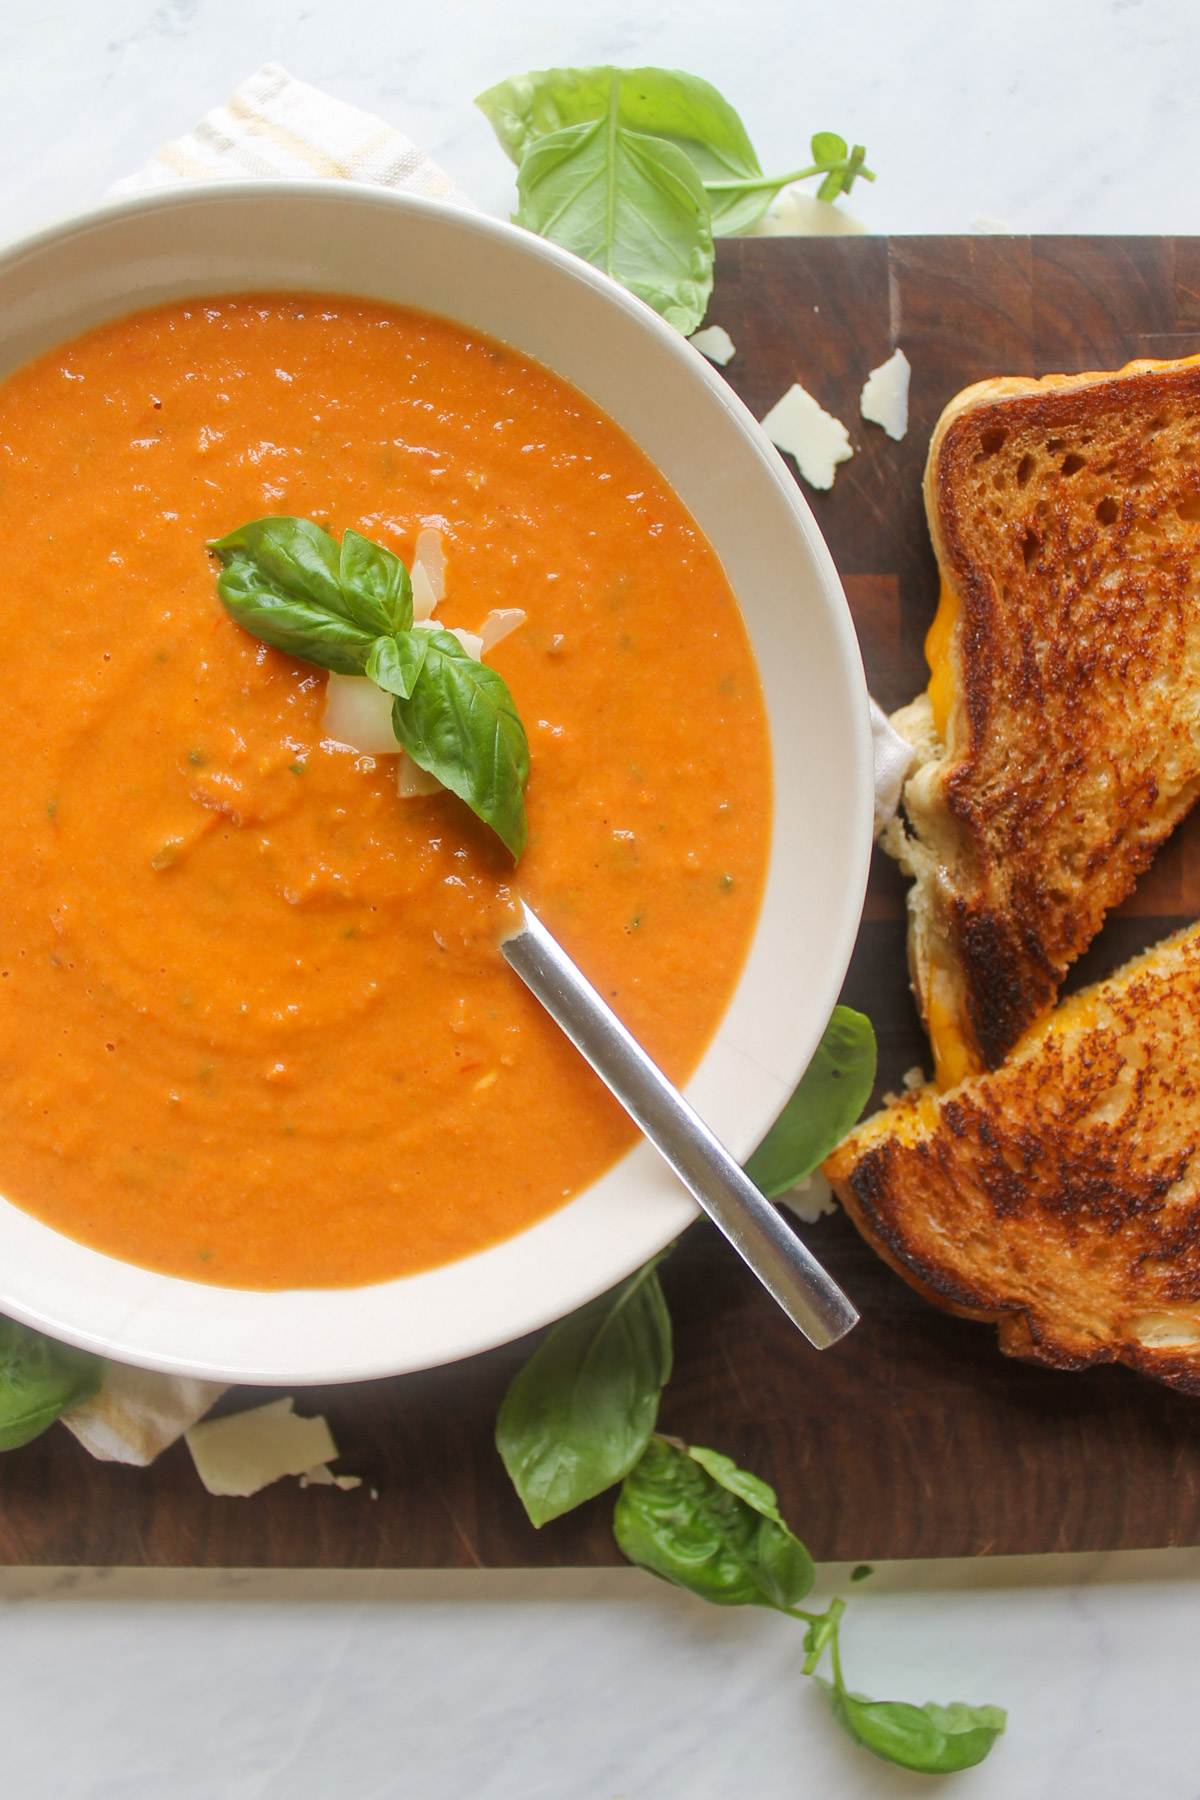 A bowl of tomato soup next to grilled cheese sandwiches for dunking.